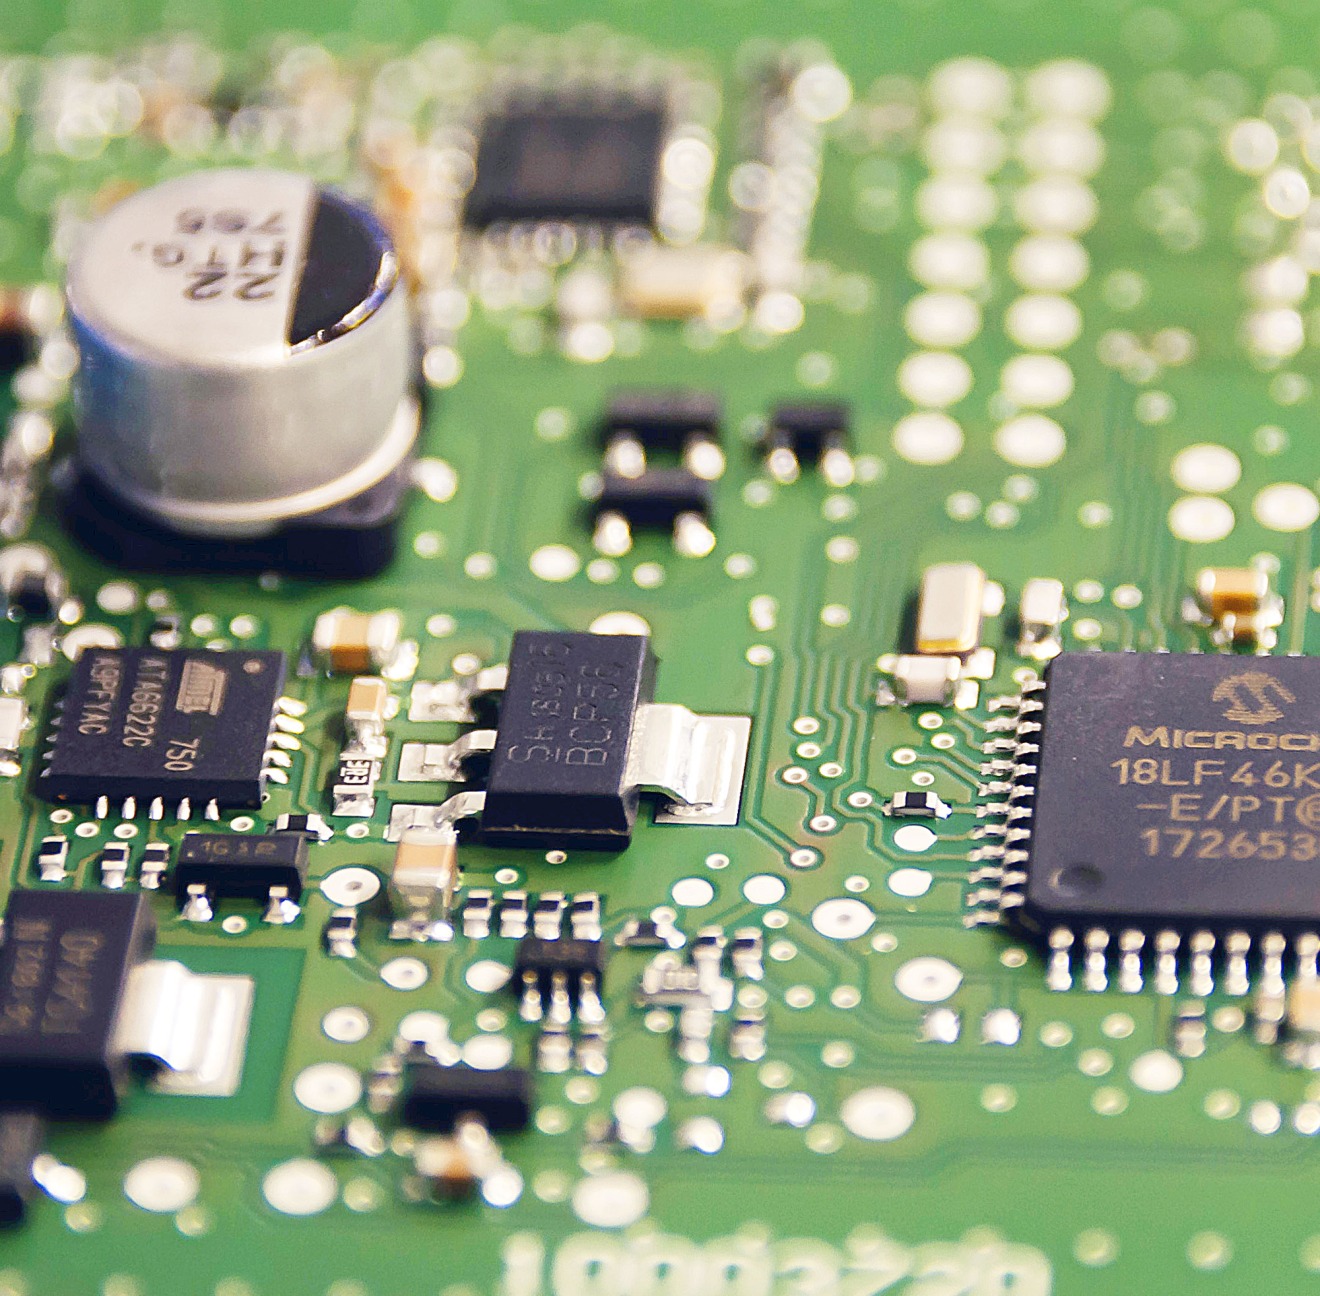 circuit board in detail view